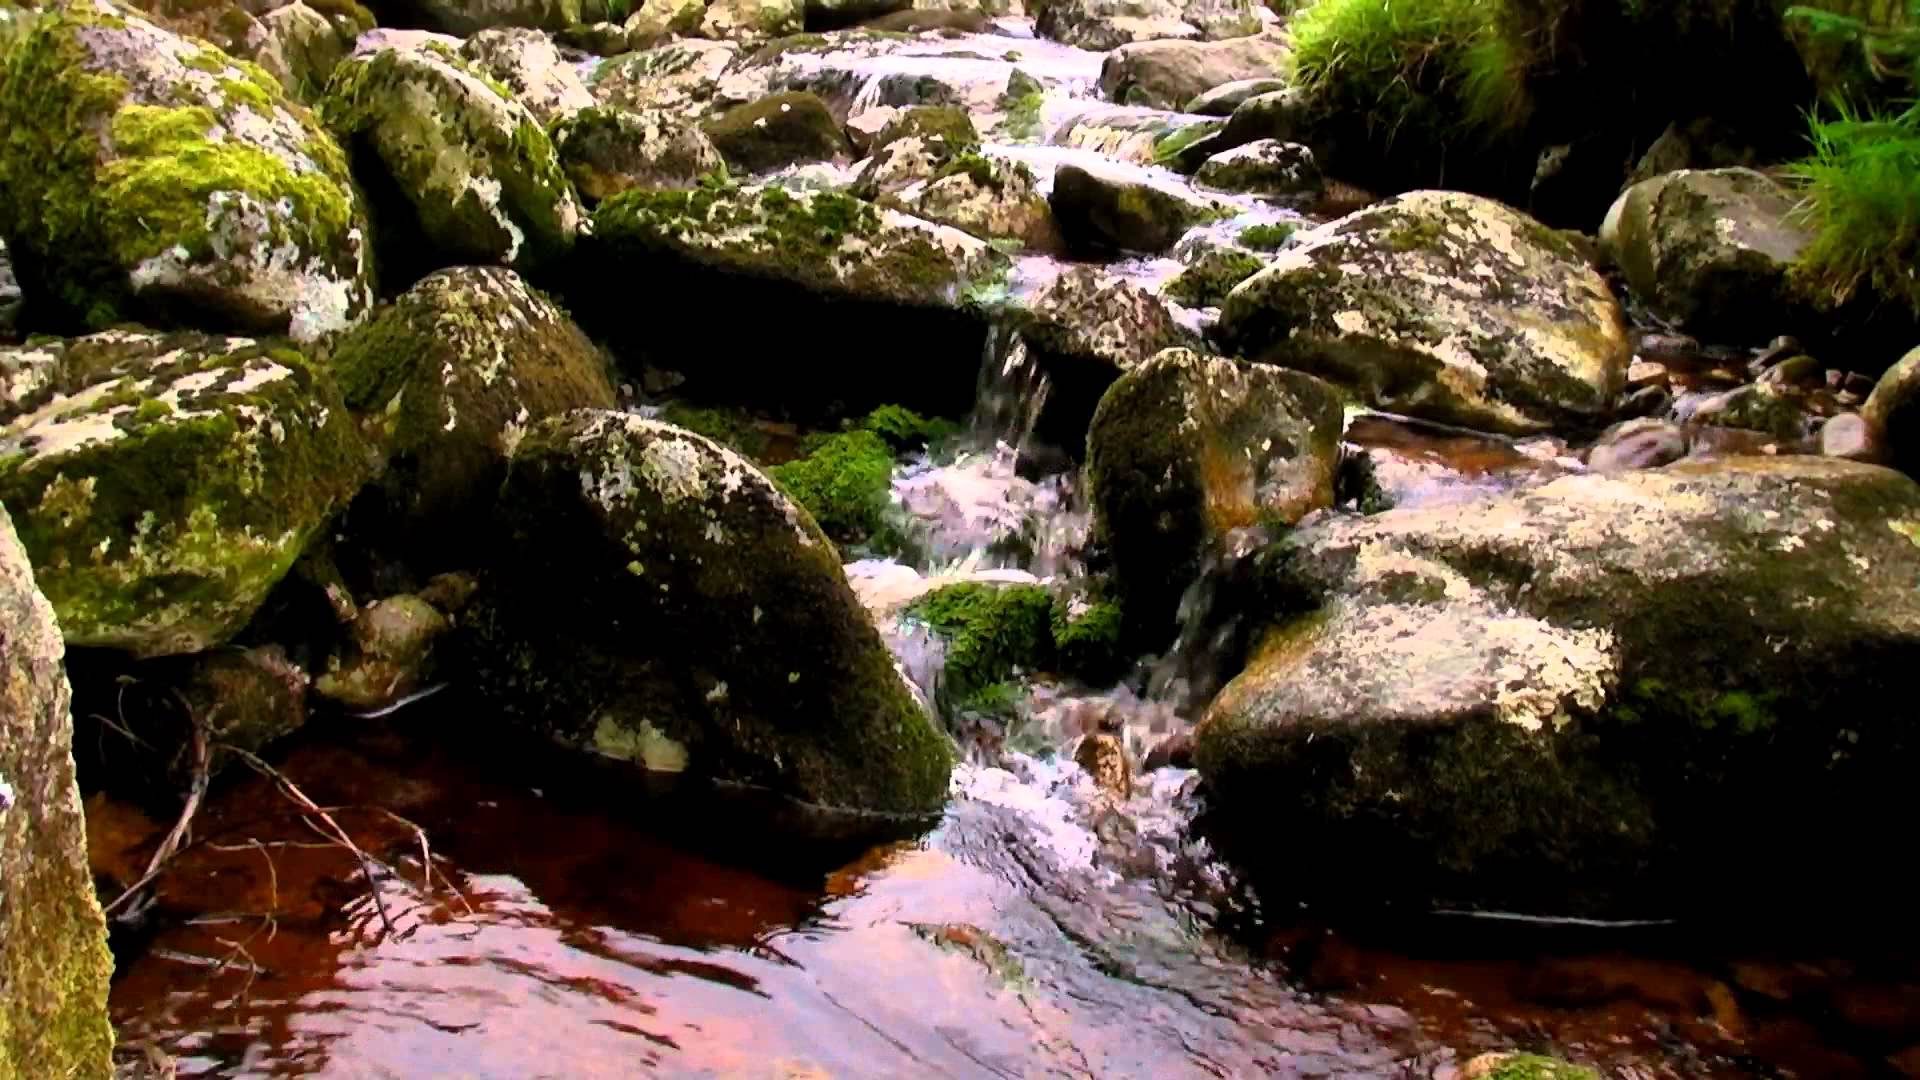 Mountain Stream with Sounds of Running Water No Music - YouTube